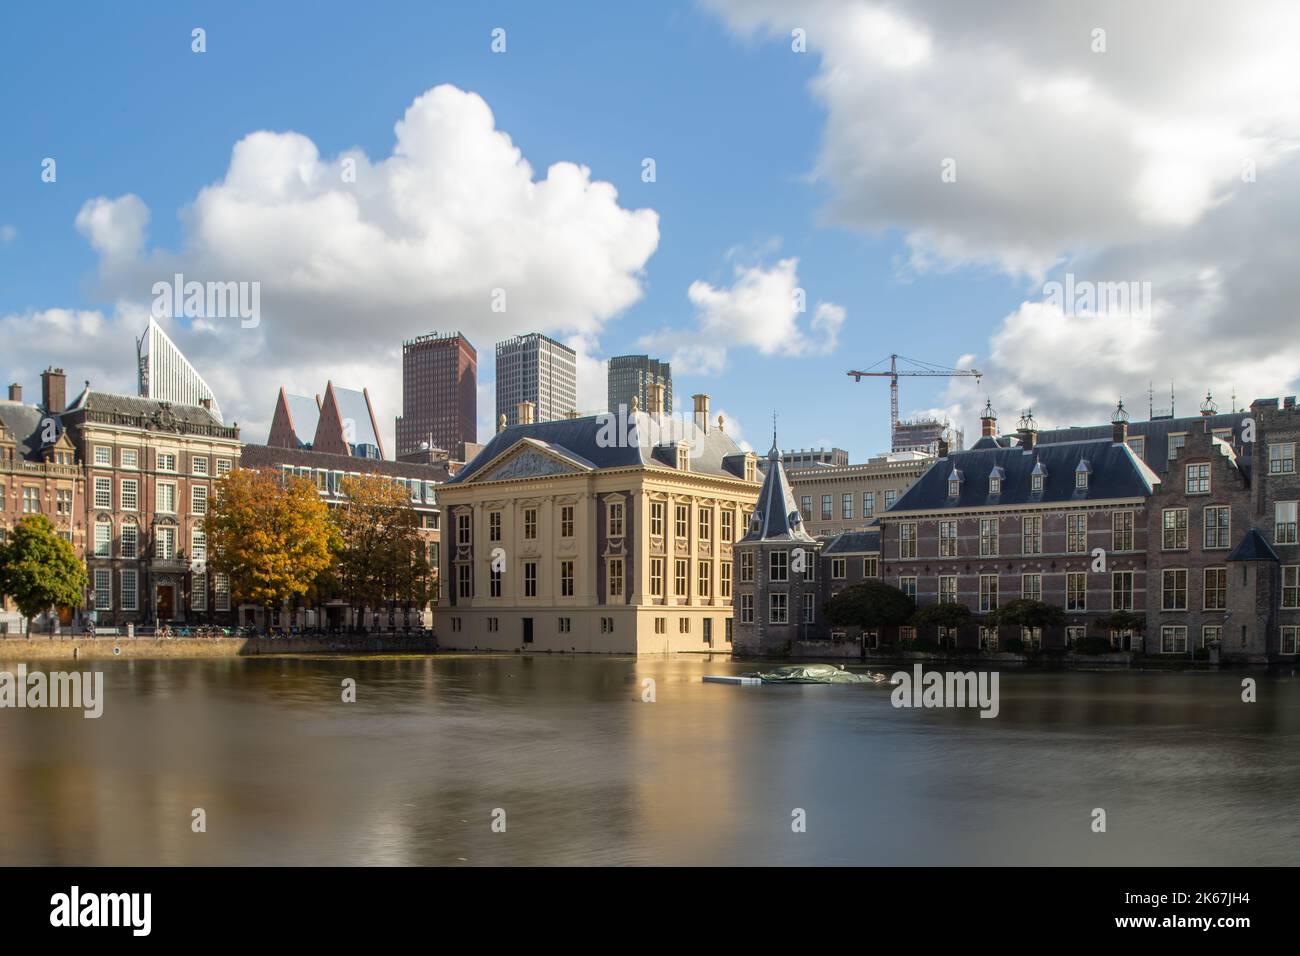 The Mauritshuis and the Binnenhof at the hofvijver, the Hague, the Netherlands Stock Photo